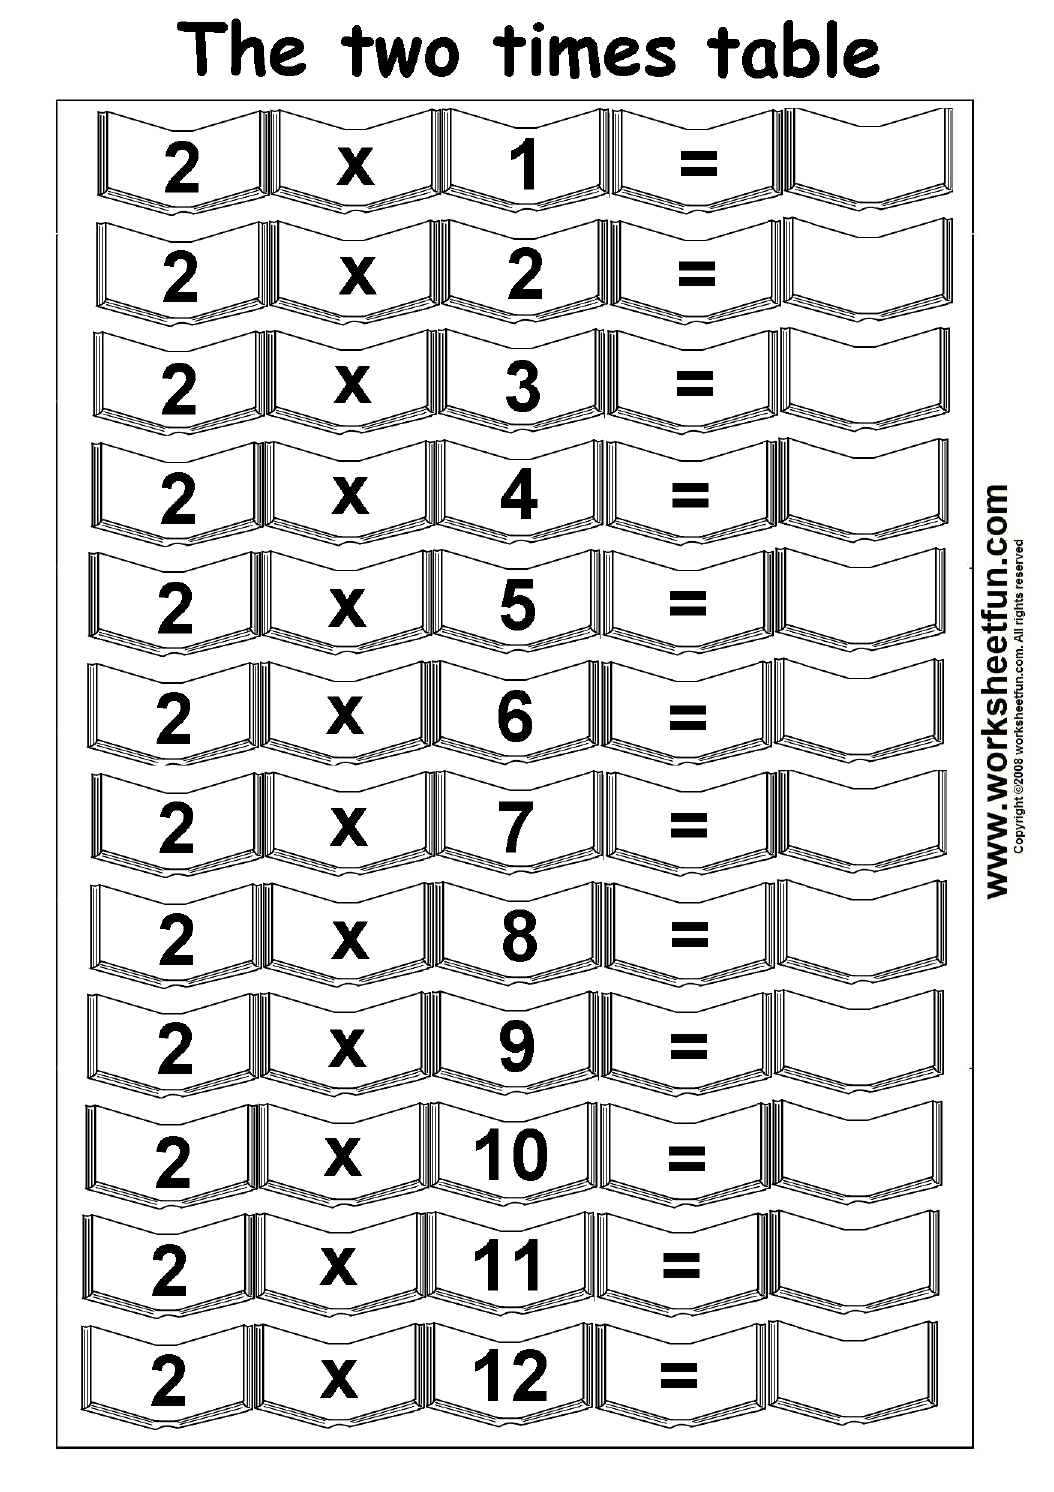 Multiplication Times Tables Worksheets – 20, 20, 20 & 20 Times Tables Within 2 Times Table Worksheet